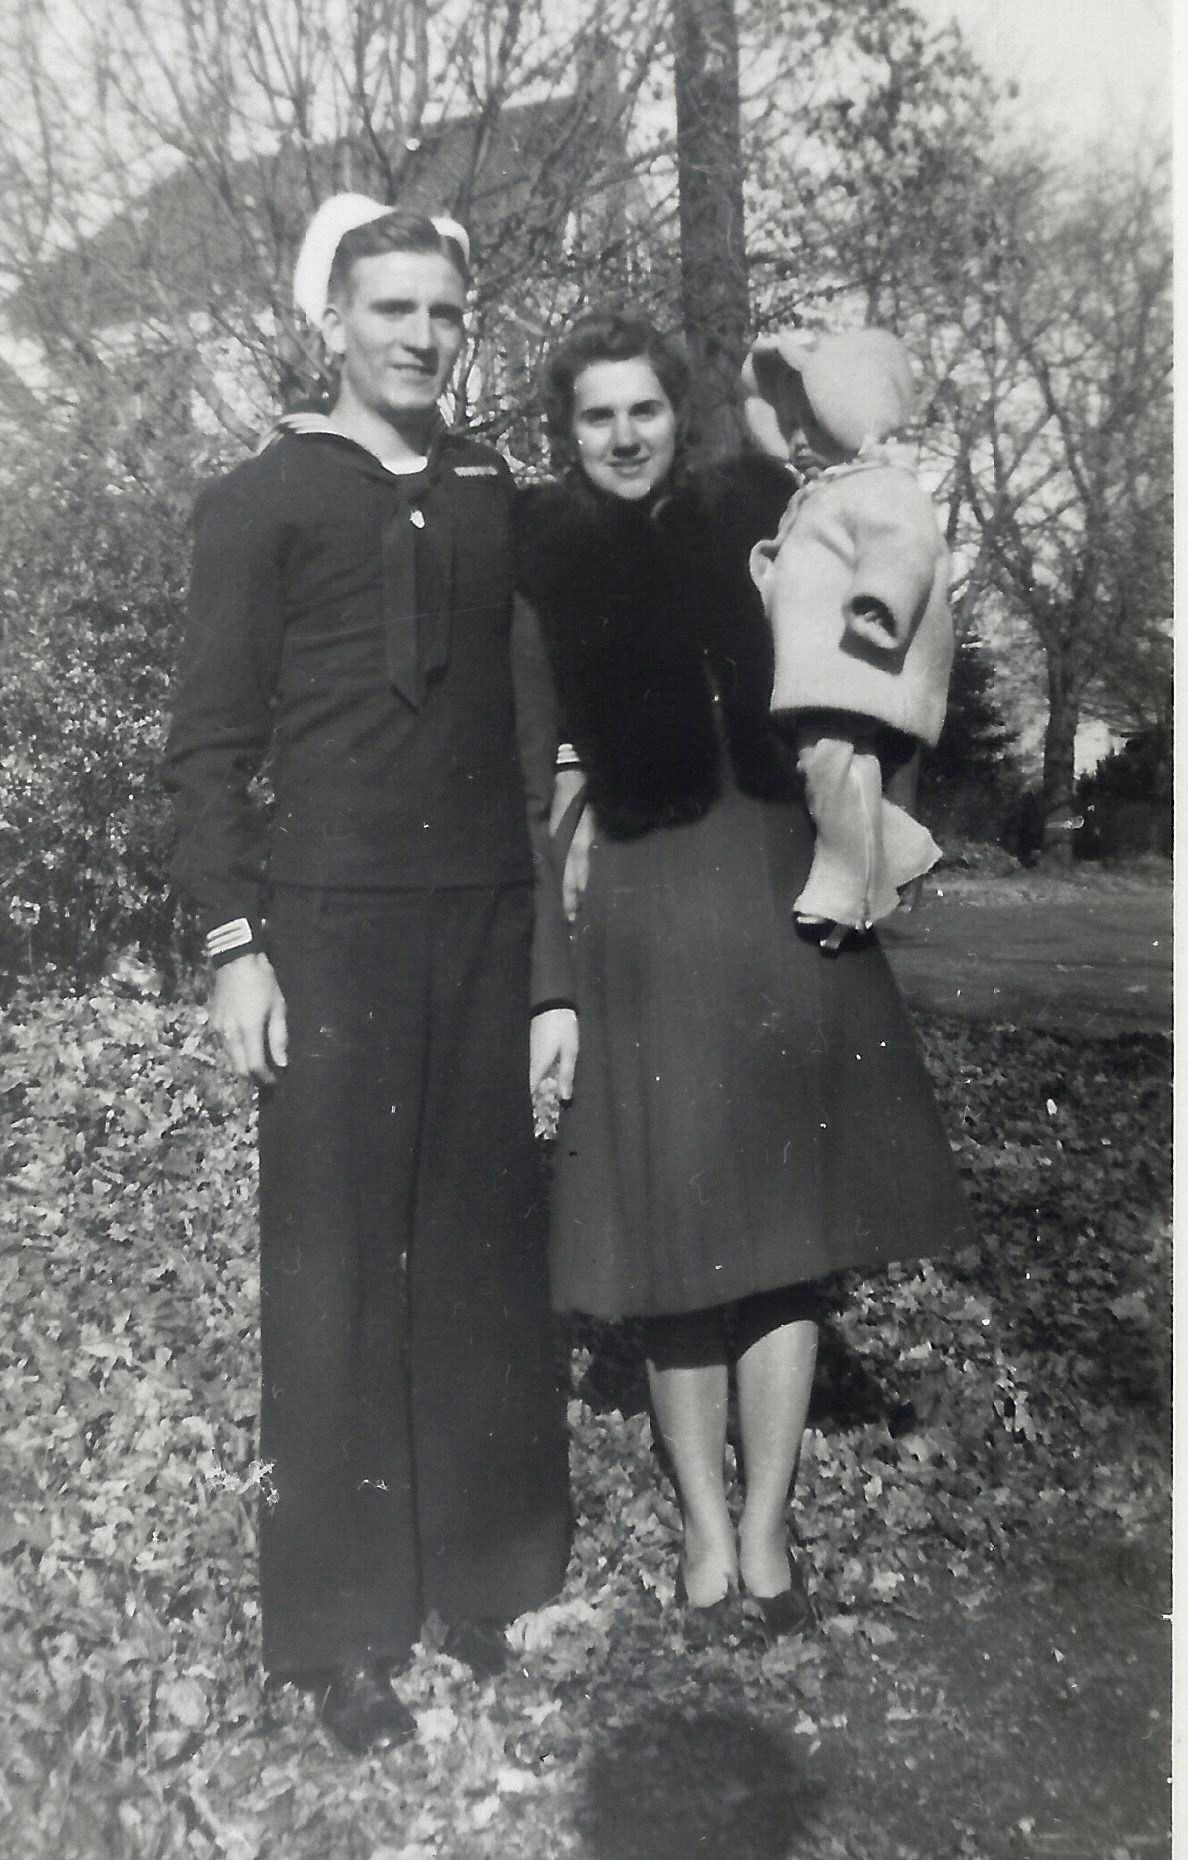 Emerson Luhman and spouse Mattie in 1944 with daughter Joyce—Matthew Stone’s mother. (credit: Mattie Hudock)